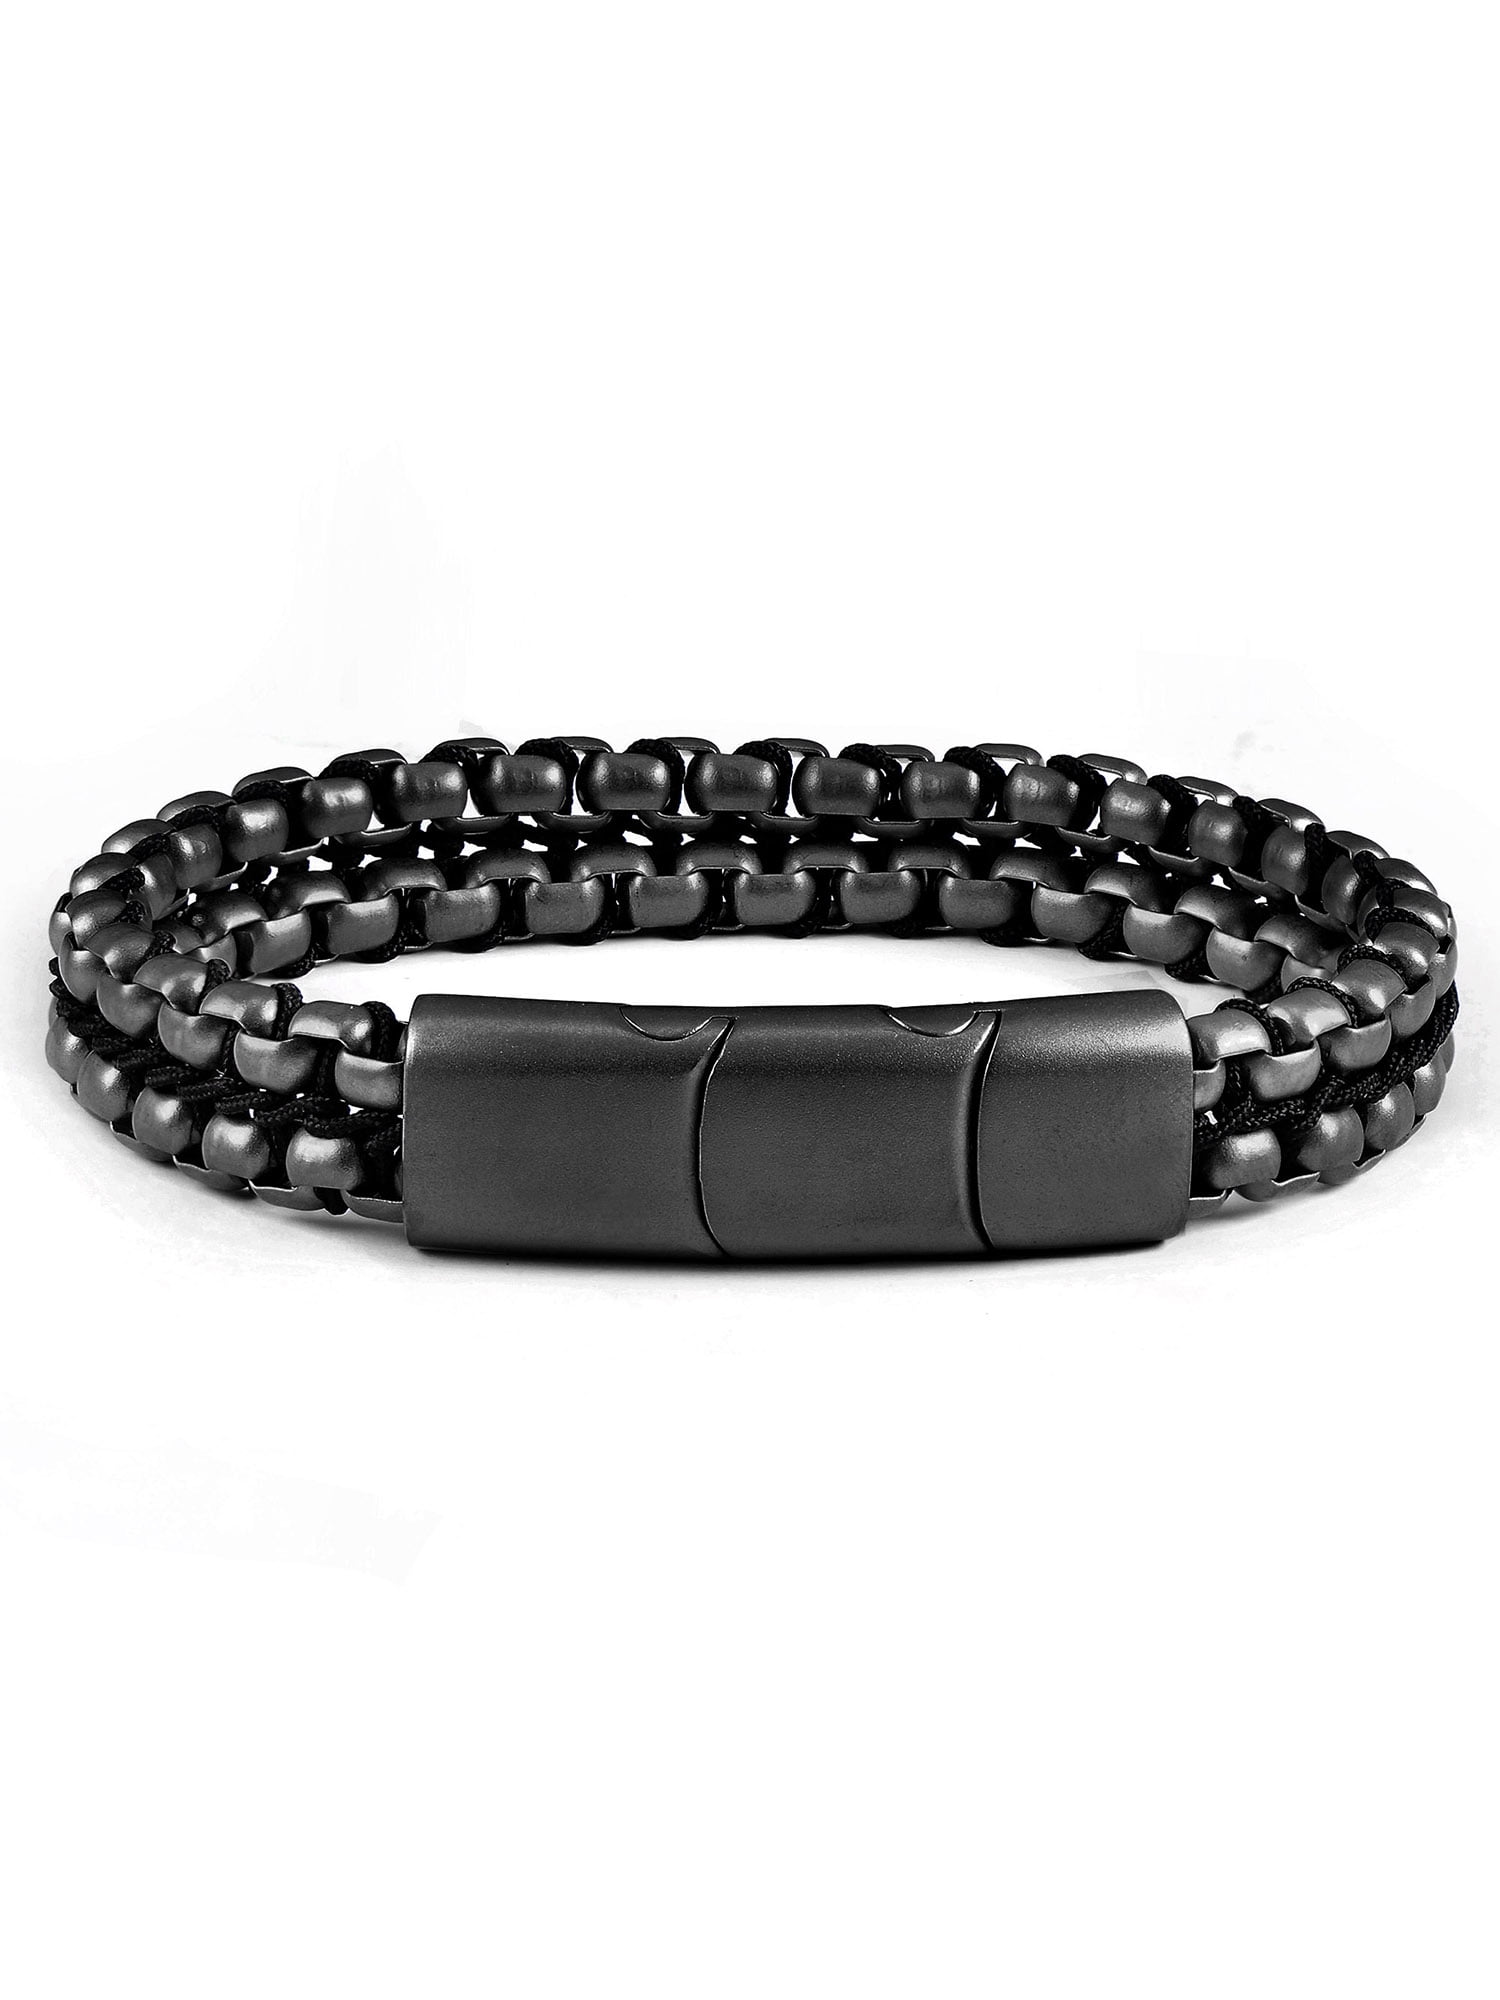 Matte Finish Stainless Steel Double Row Box Chain Bracelet with Black Nylon Cord - Black